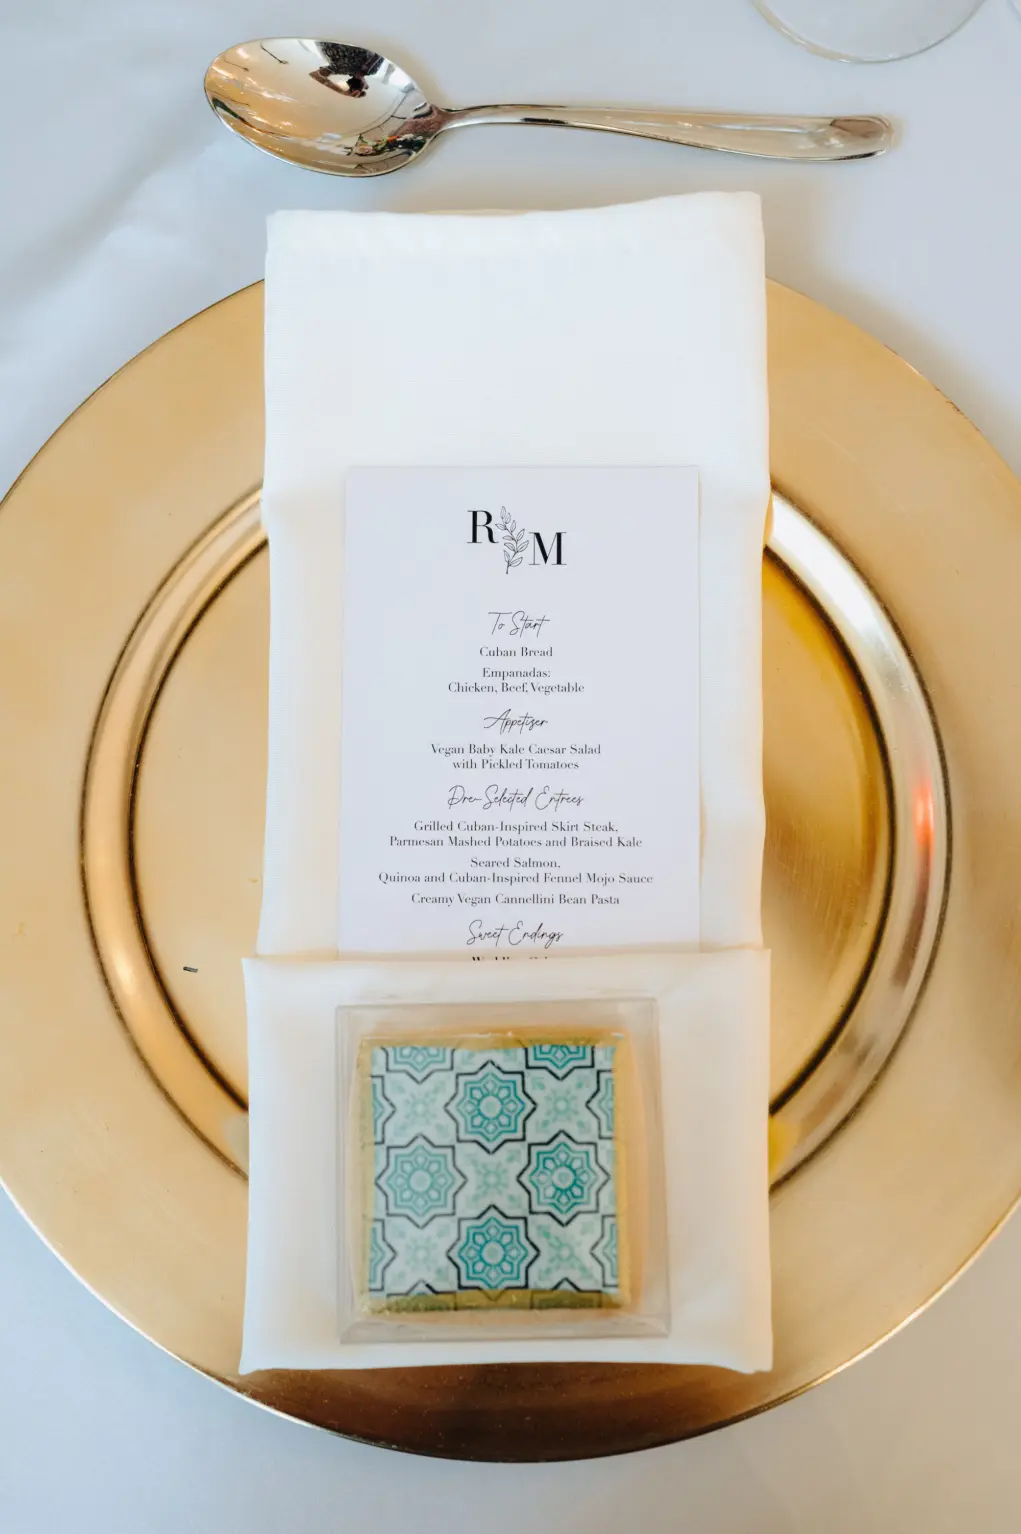 Personalized Wedding Reception Dinner Menu Card Ideas | Wedding Guest Cookie Gift Inspiration